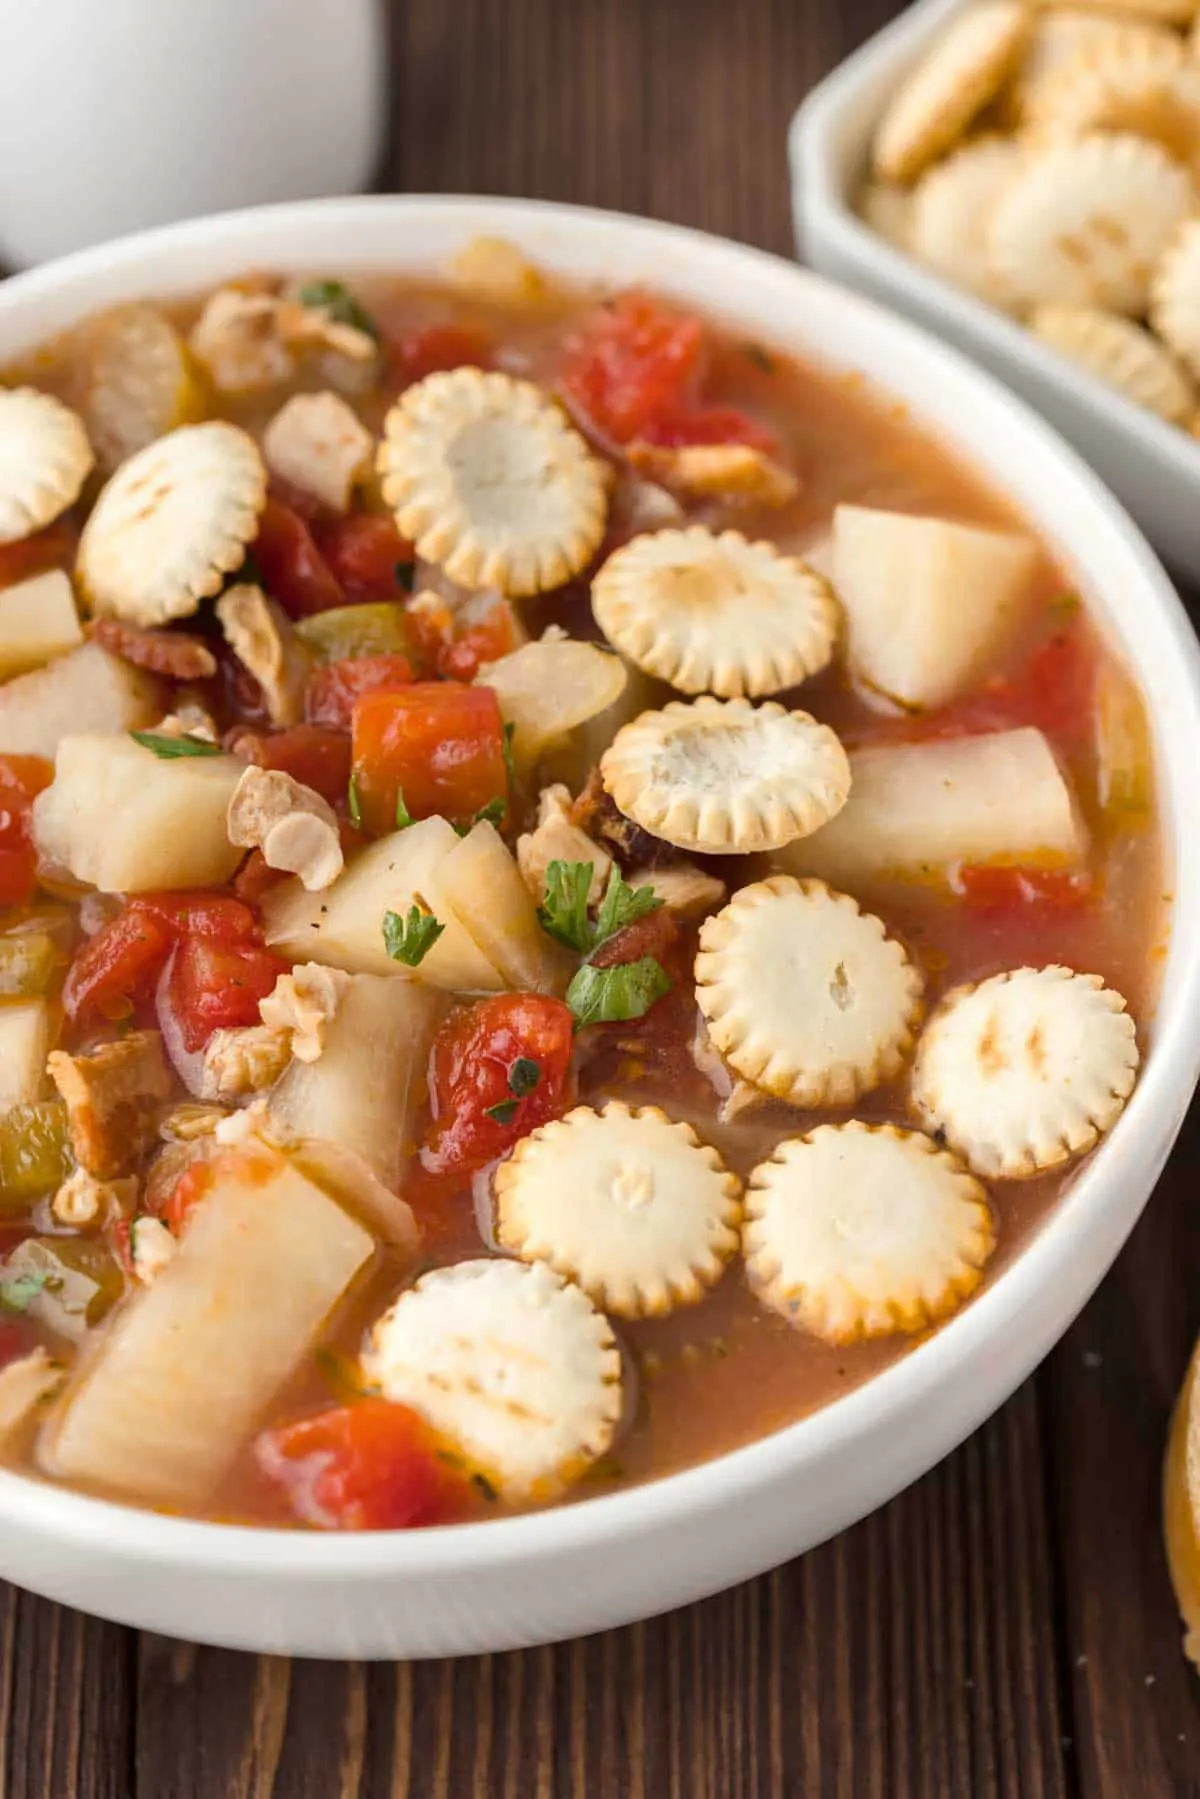 Manhattan Clam Chowder is a hearty soup loaded with chopped clams, diced tomatoes, potatoes, celery and chopped bacon all in a flavourful tomato broth.